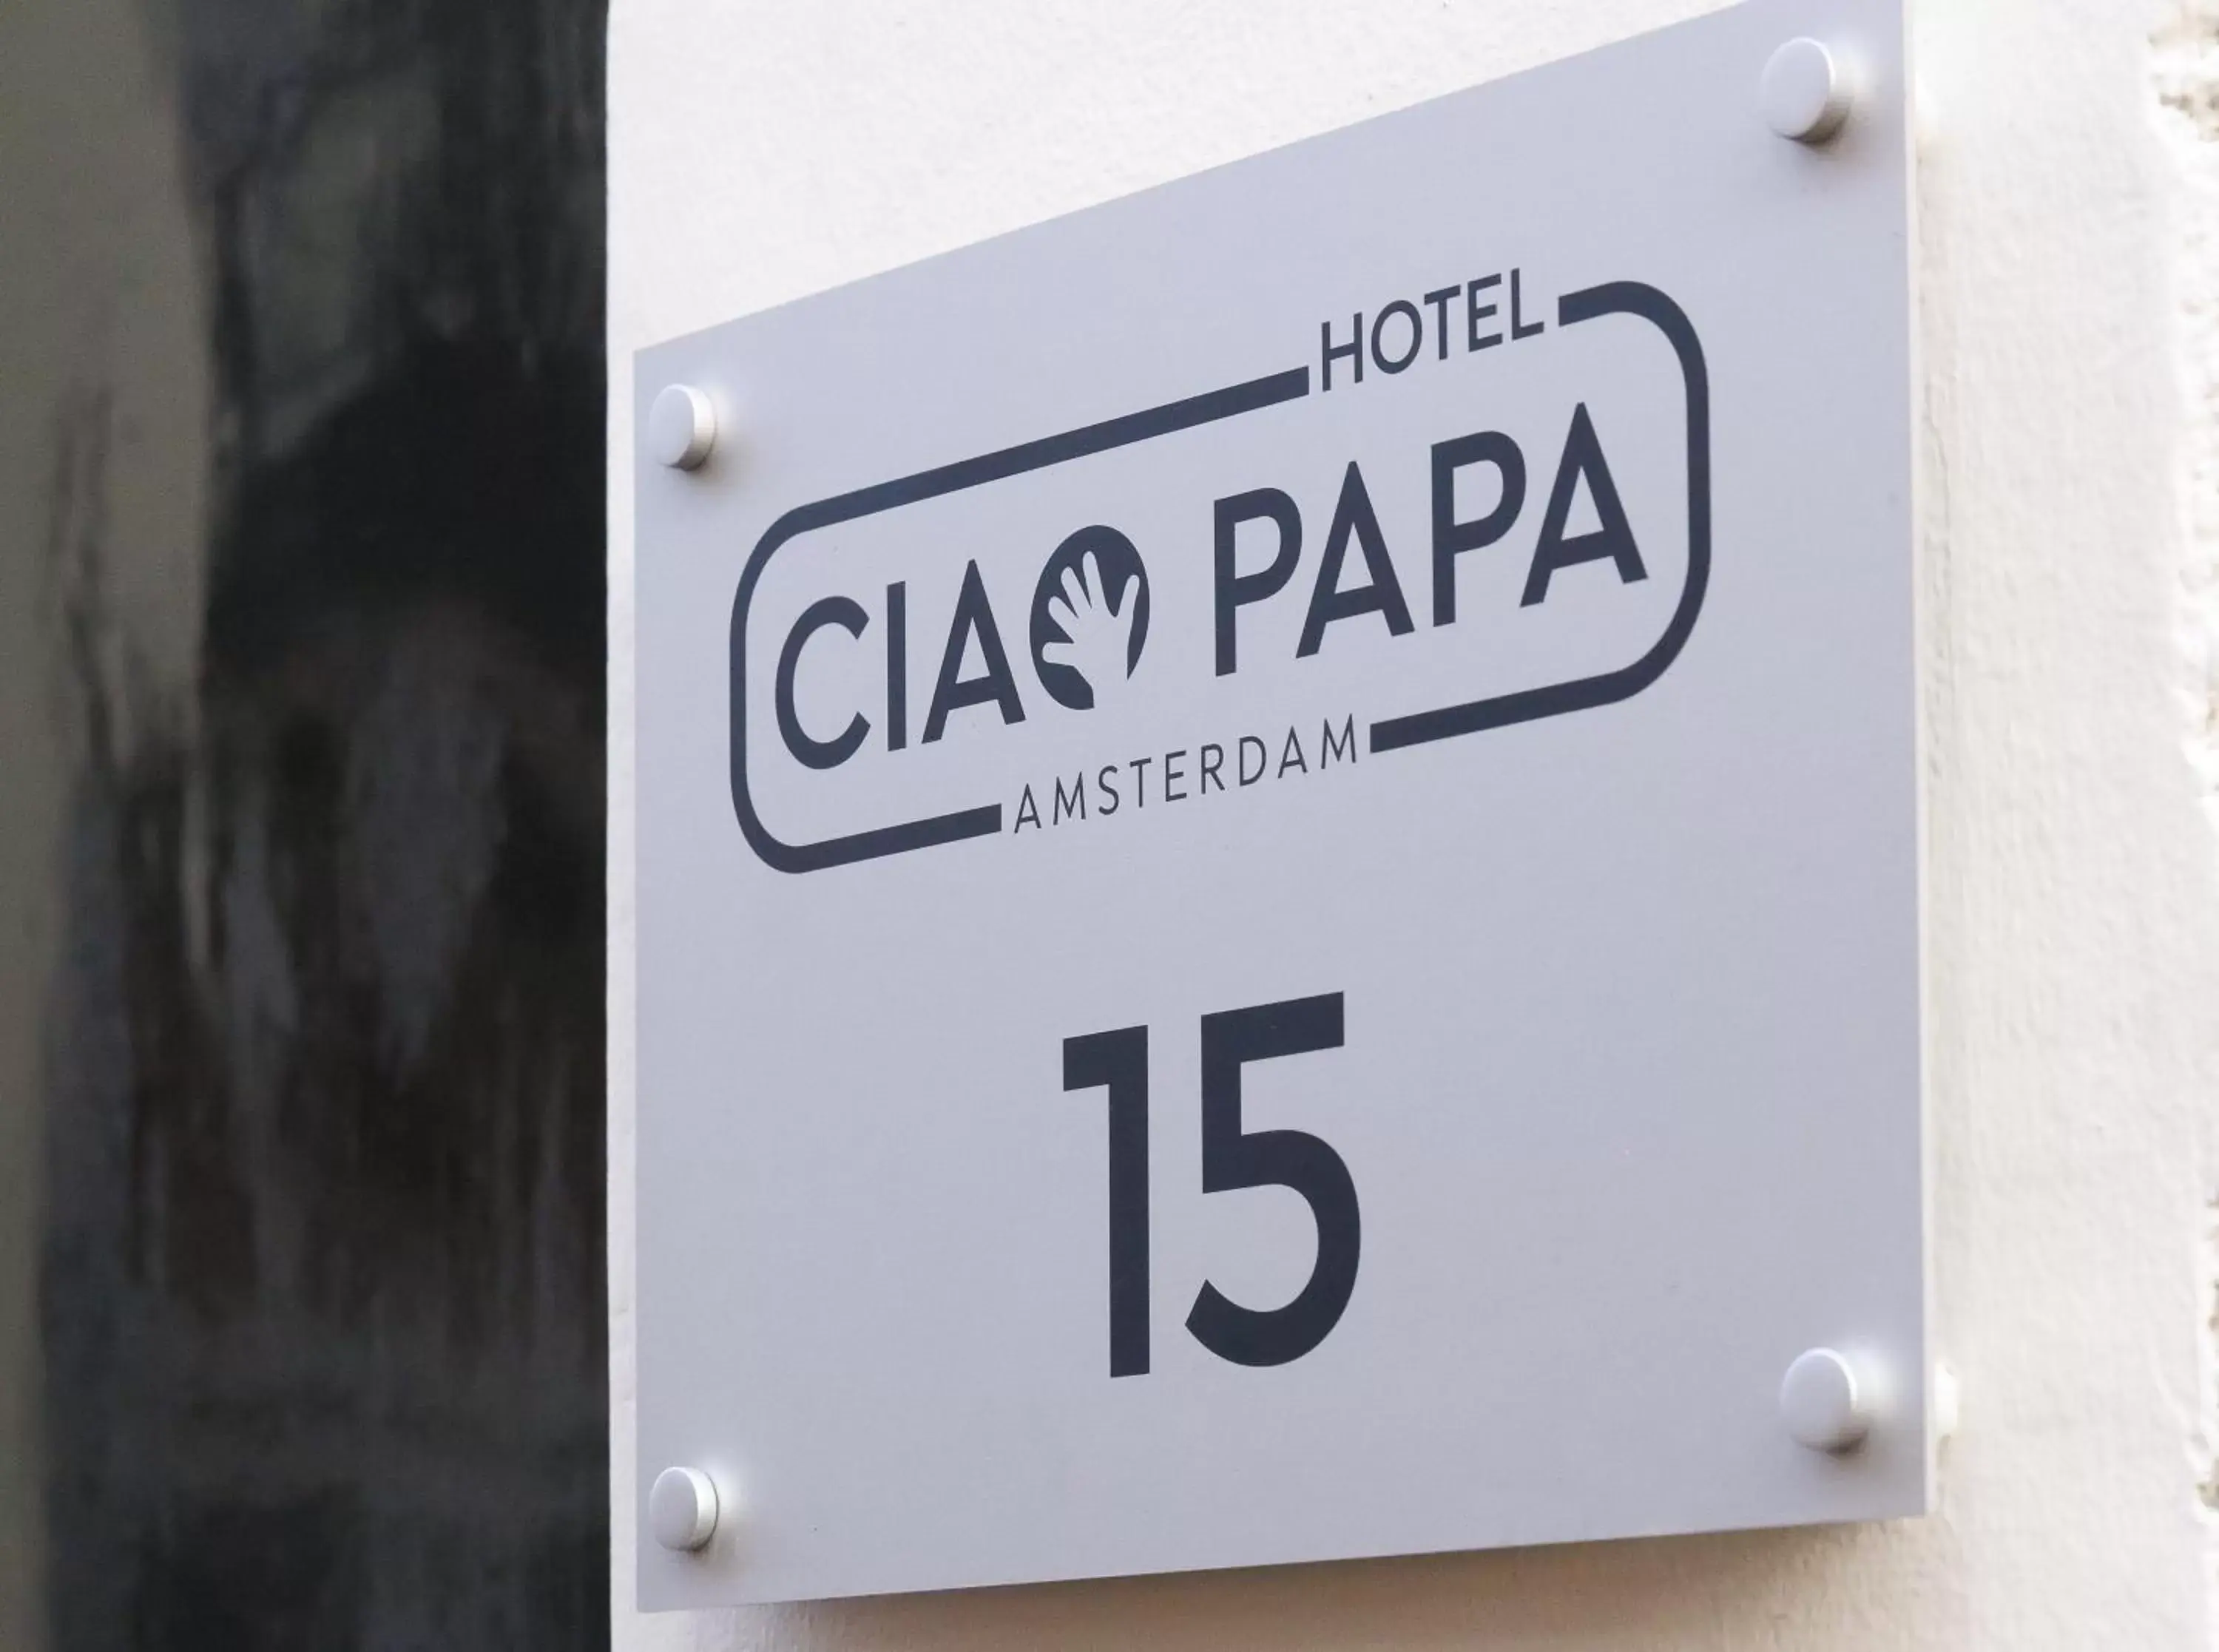 Property building in Ciao Papa Hotel Amsterdam Central Station